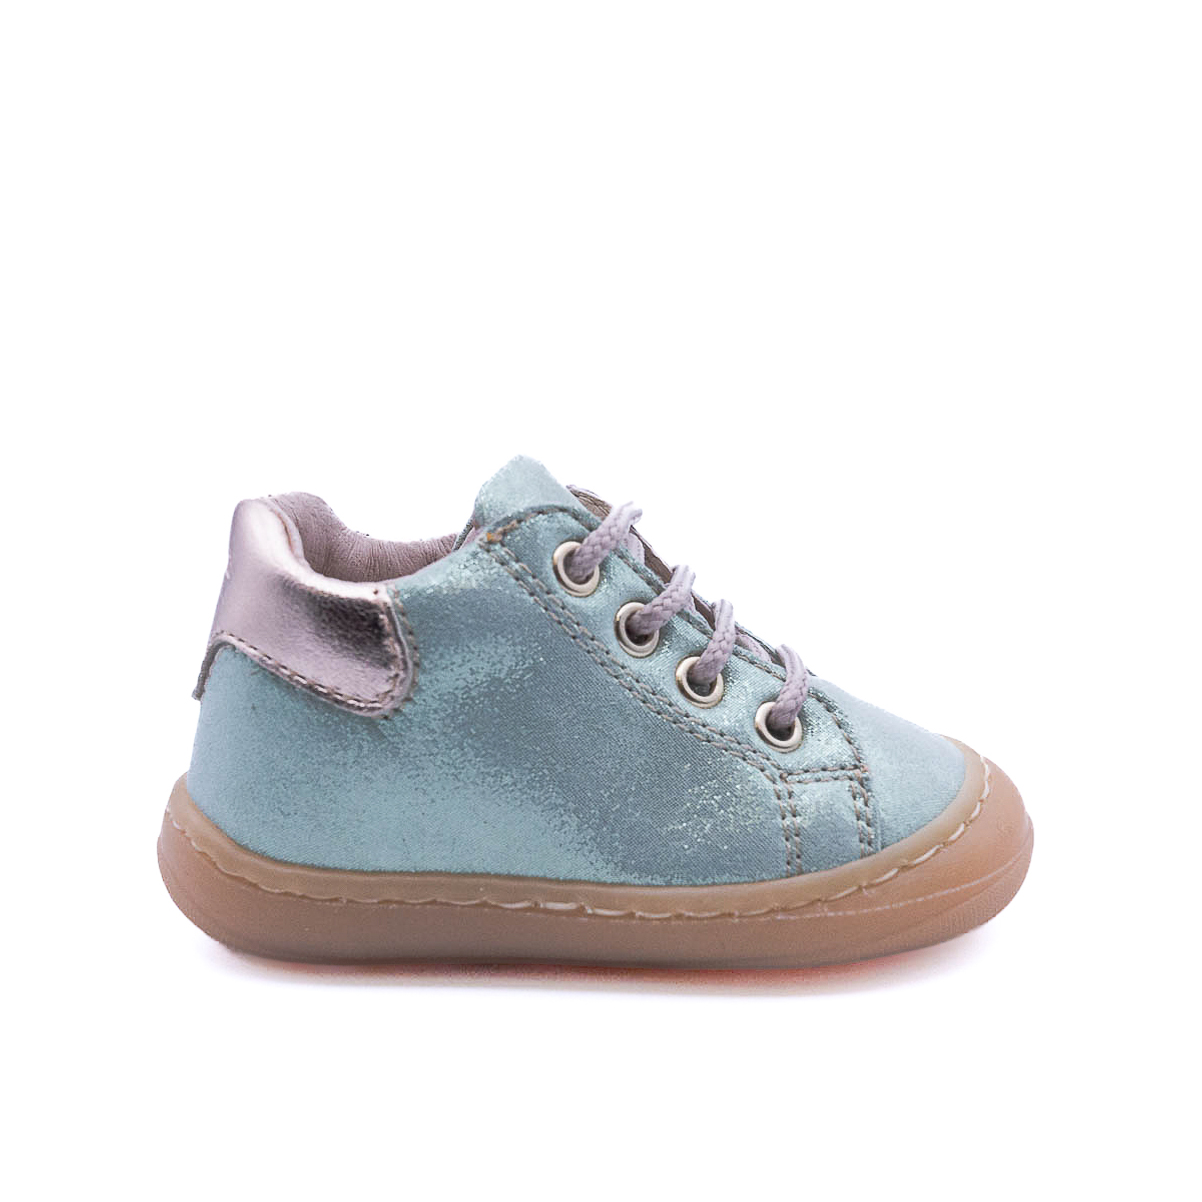 Chaussures Fille 18-35 - Collection PE22